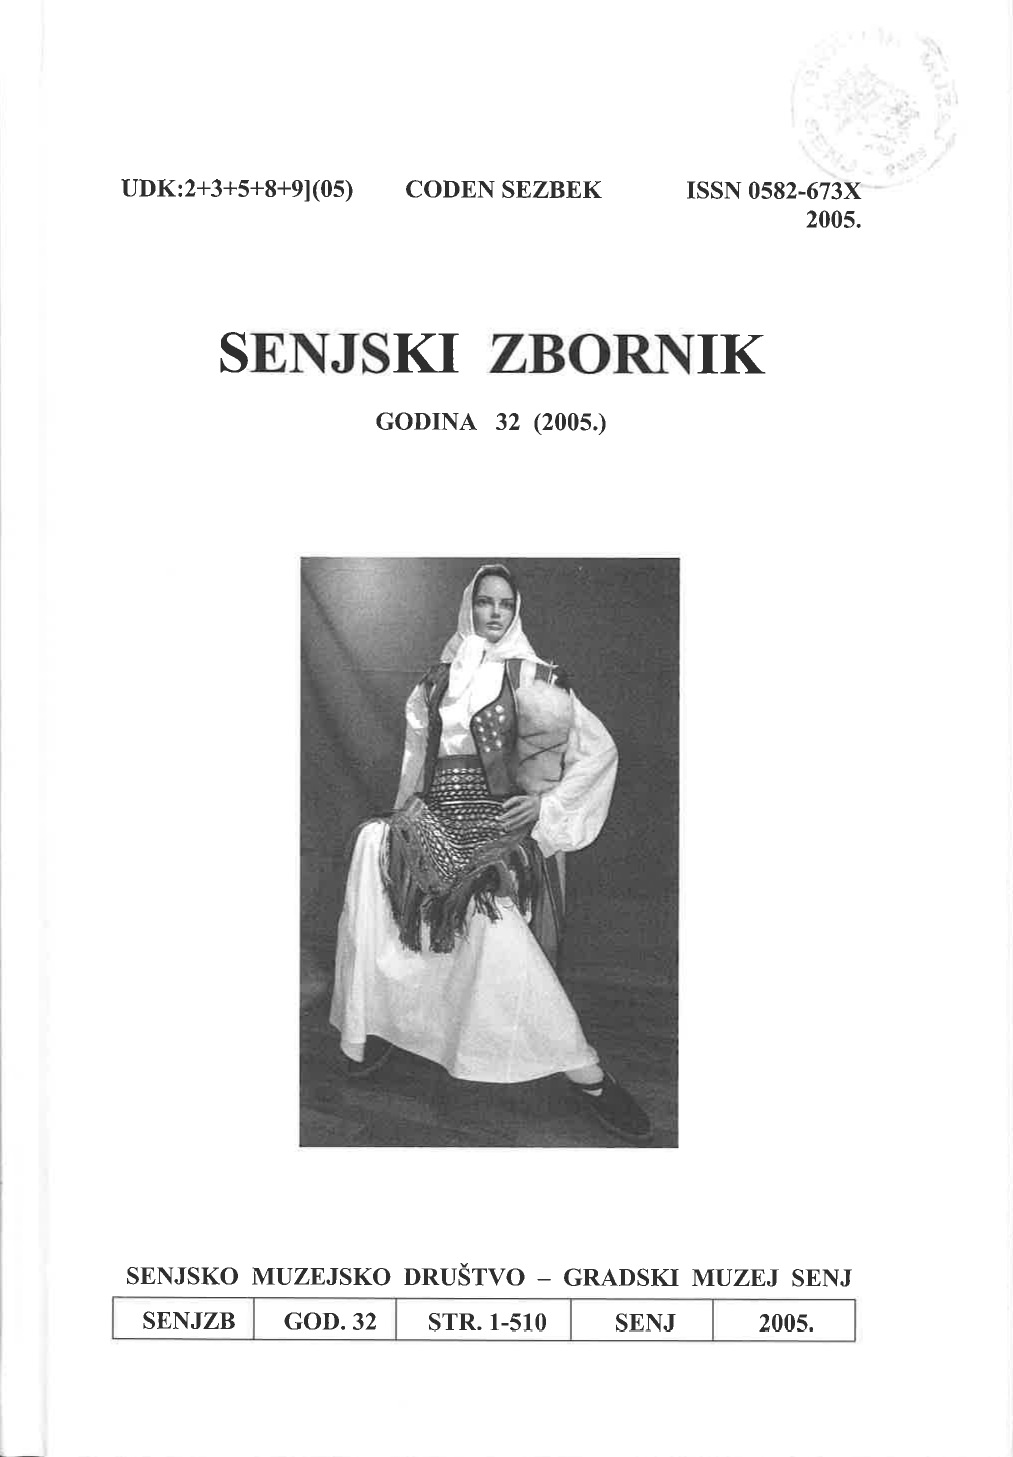 Glance into the Gospić List of Names Cover Image